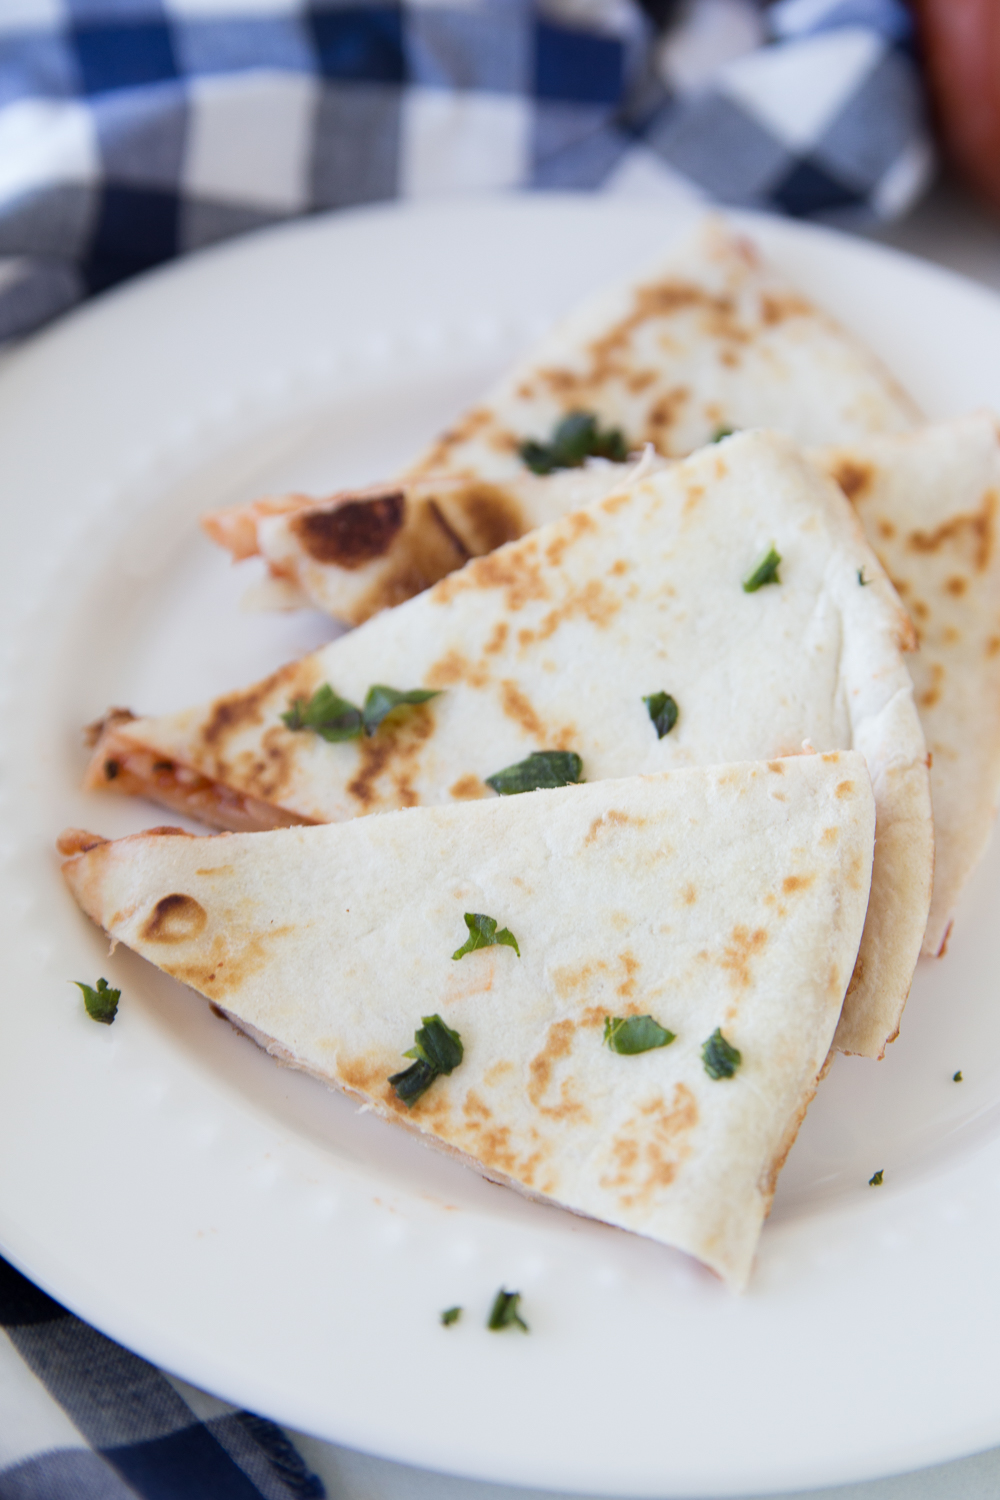 Flour tortillas topped with mozzarella cheese, homemade pizza sauce and your favorite pizza toppings makes for a delicious lunch!  Pack in a lunchbox for work, school, picnics, hikes, or just a yummy on-the-go lunch idea. 